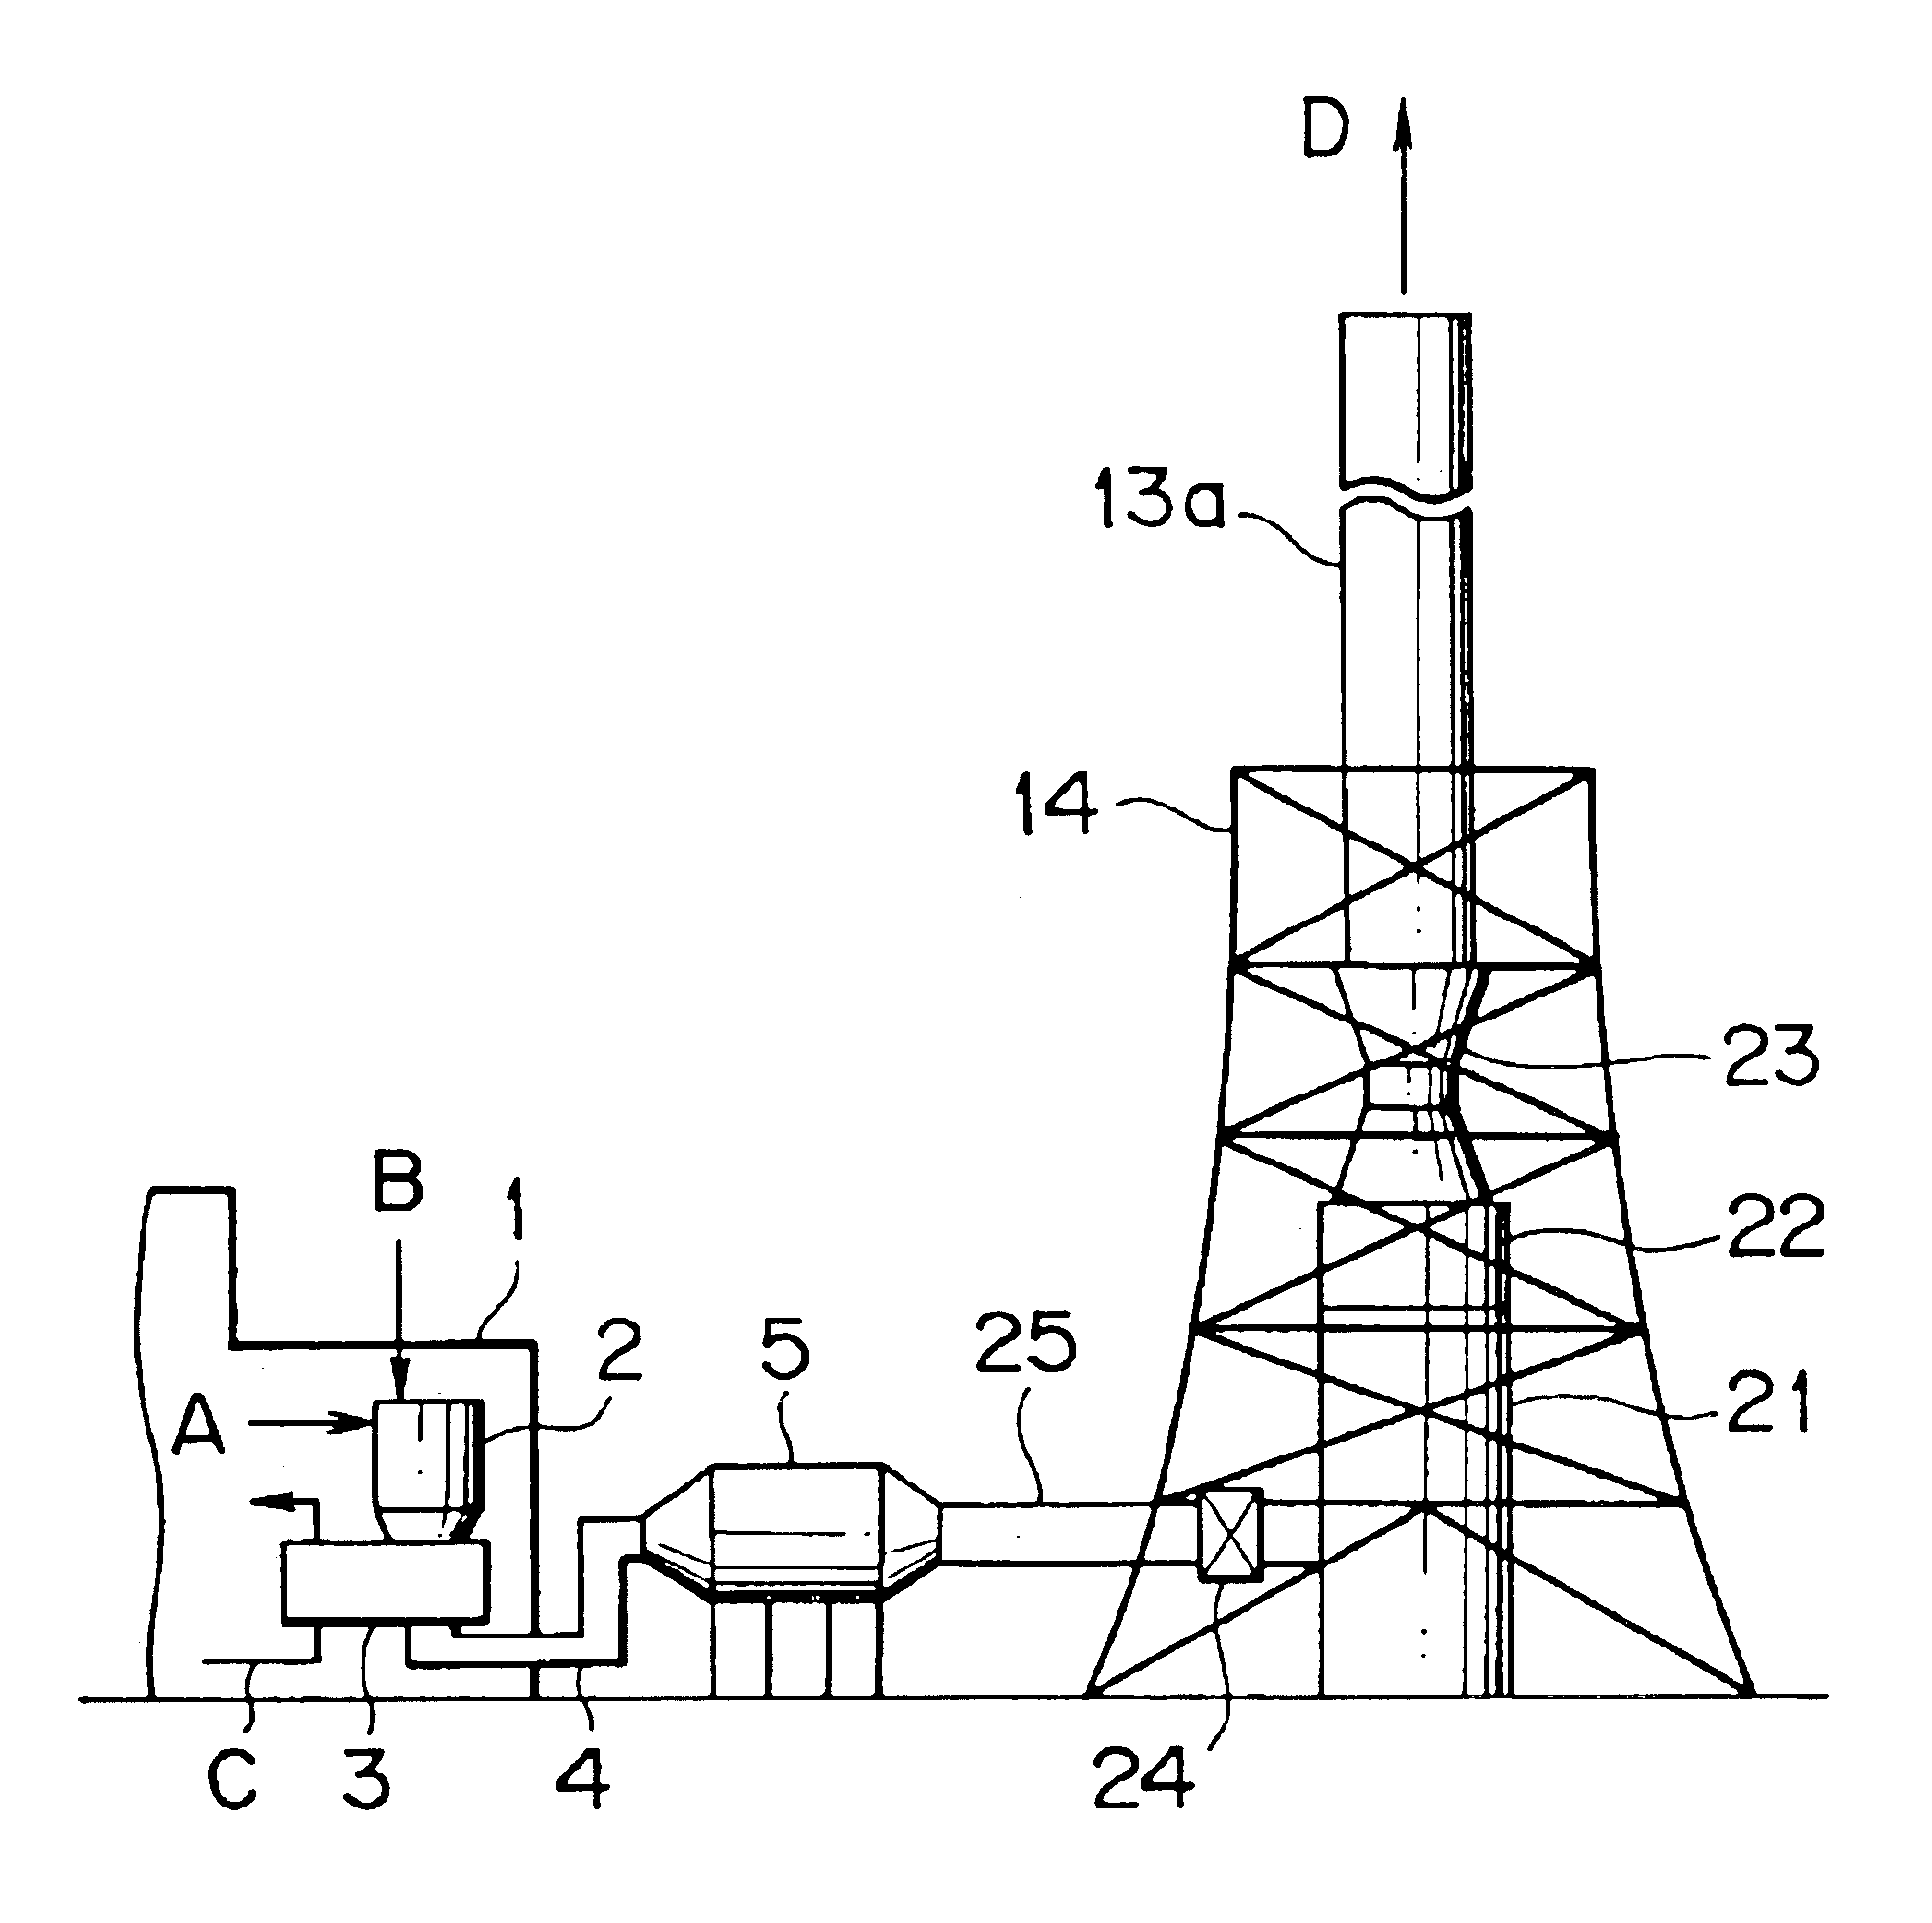 Flue gas treating system and process